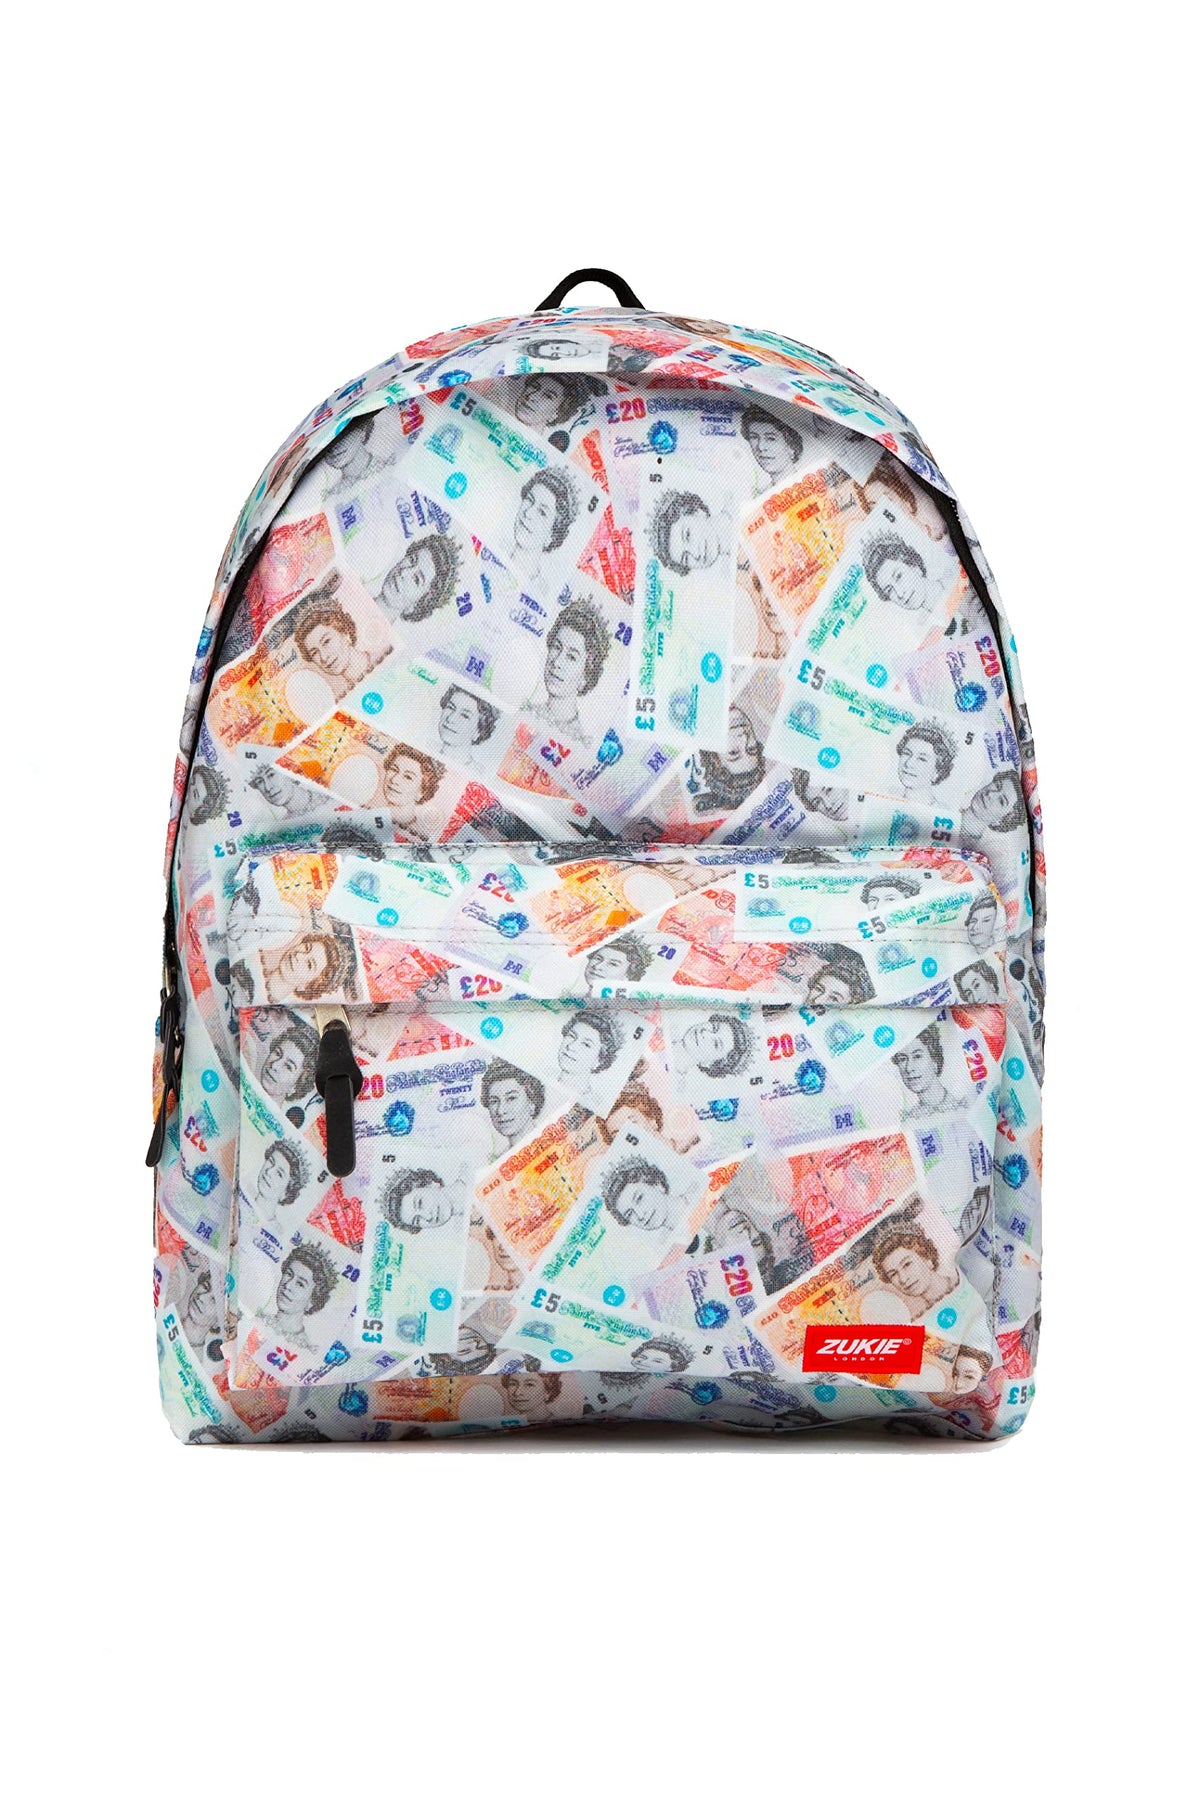 Hype Mens Money Backpack, Multi, One Size